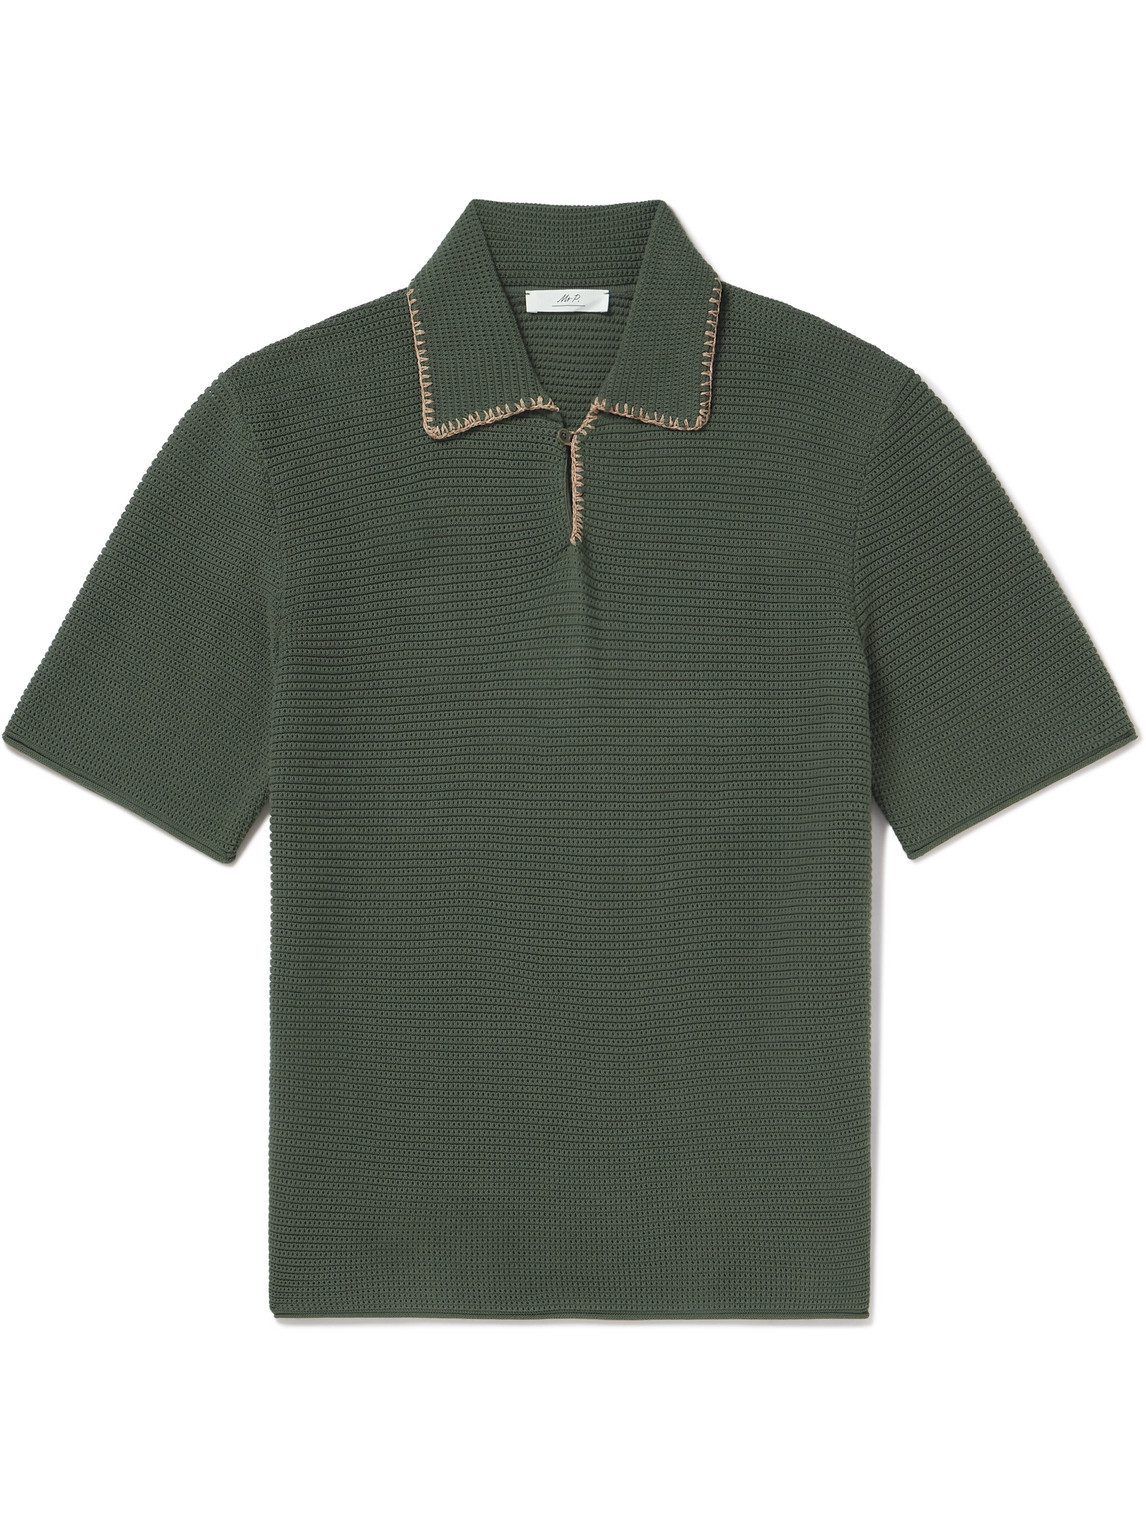 Mr P Embroidered Cotton Polo Shirt In Green